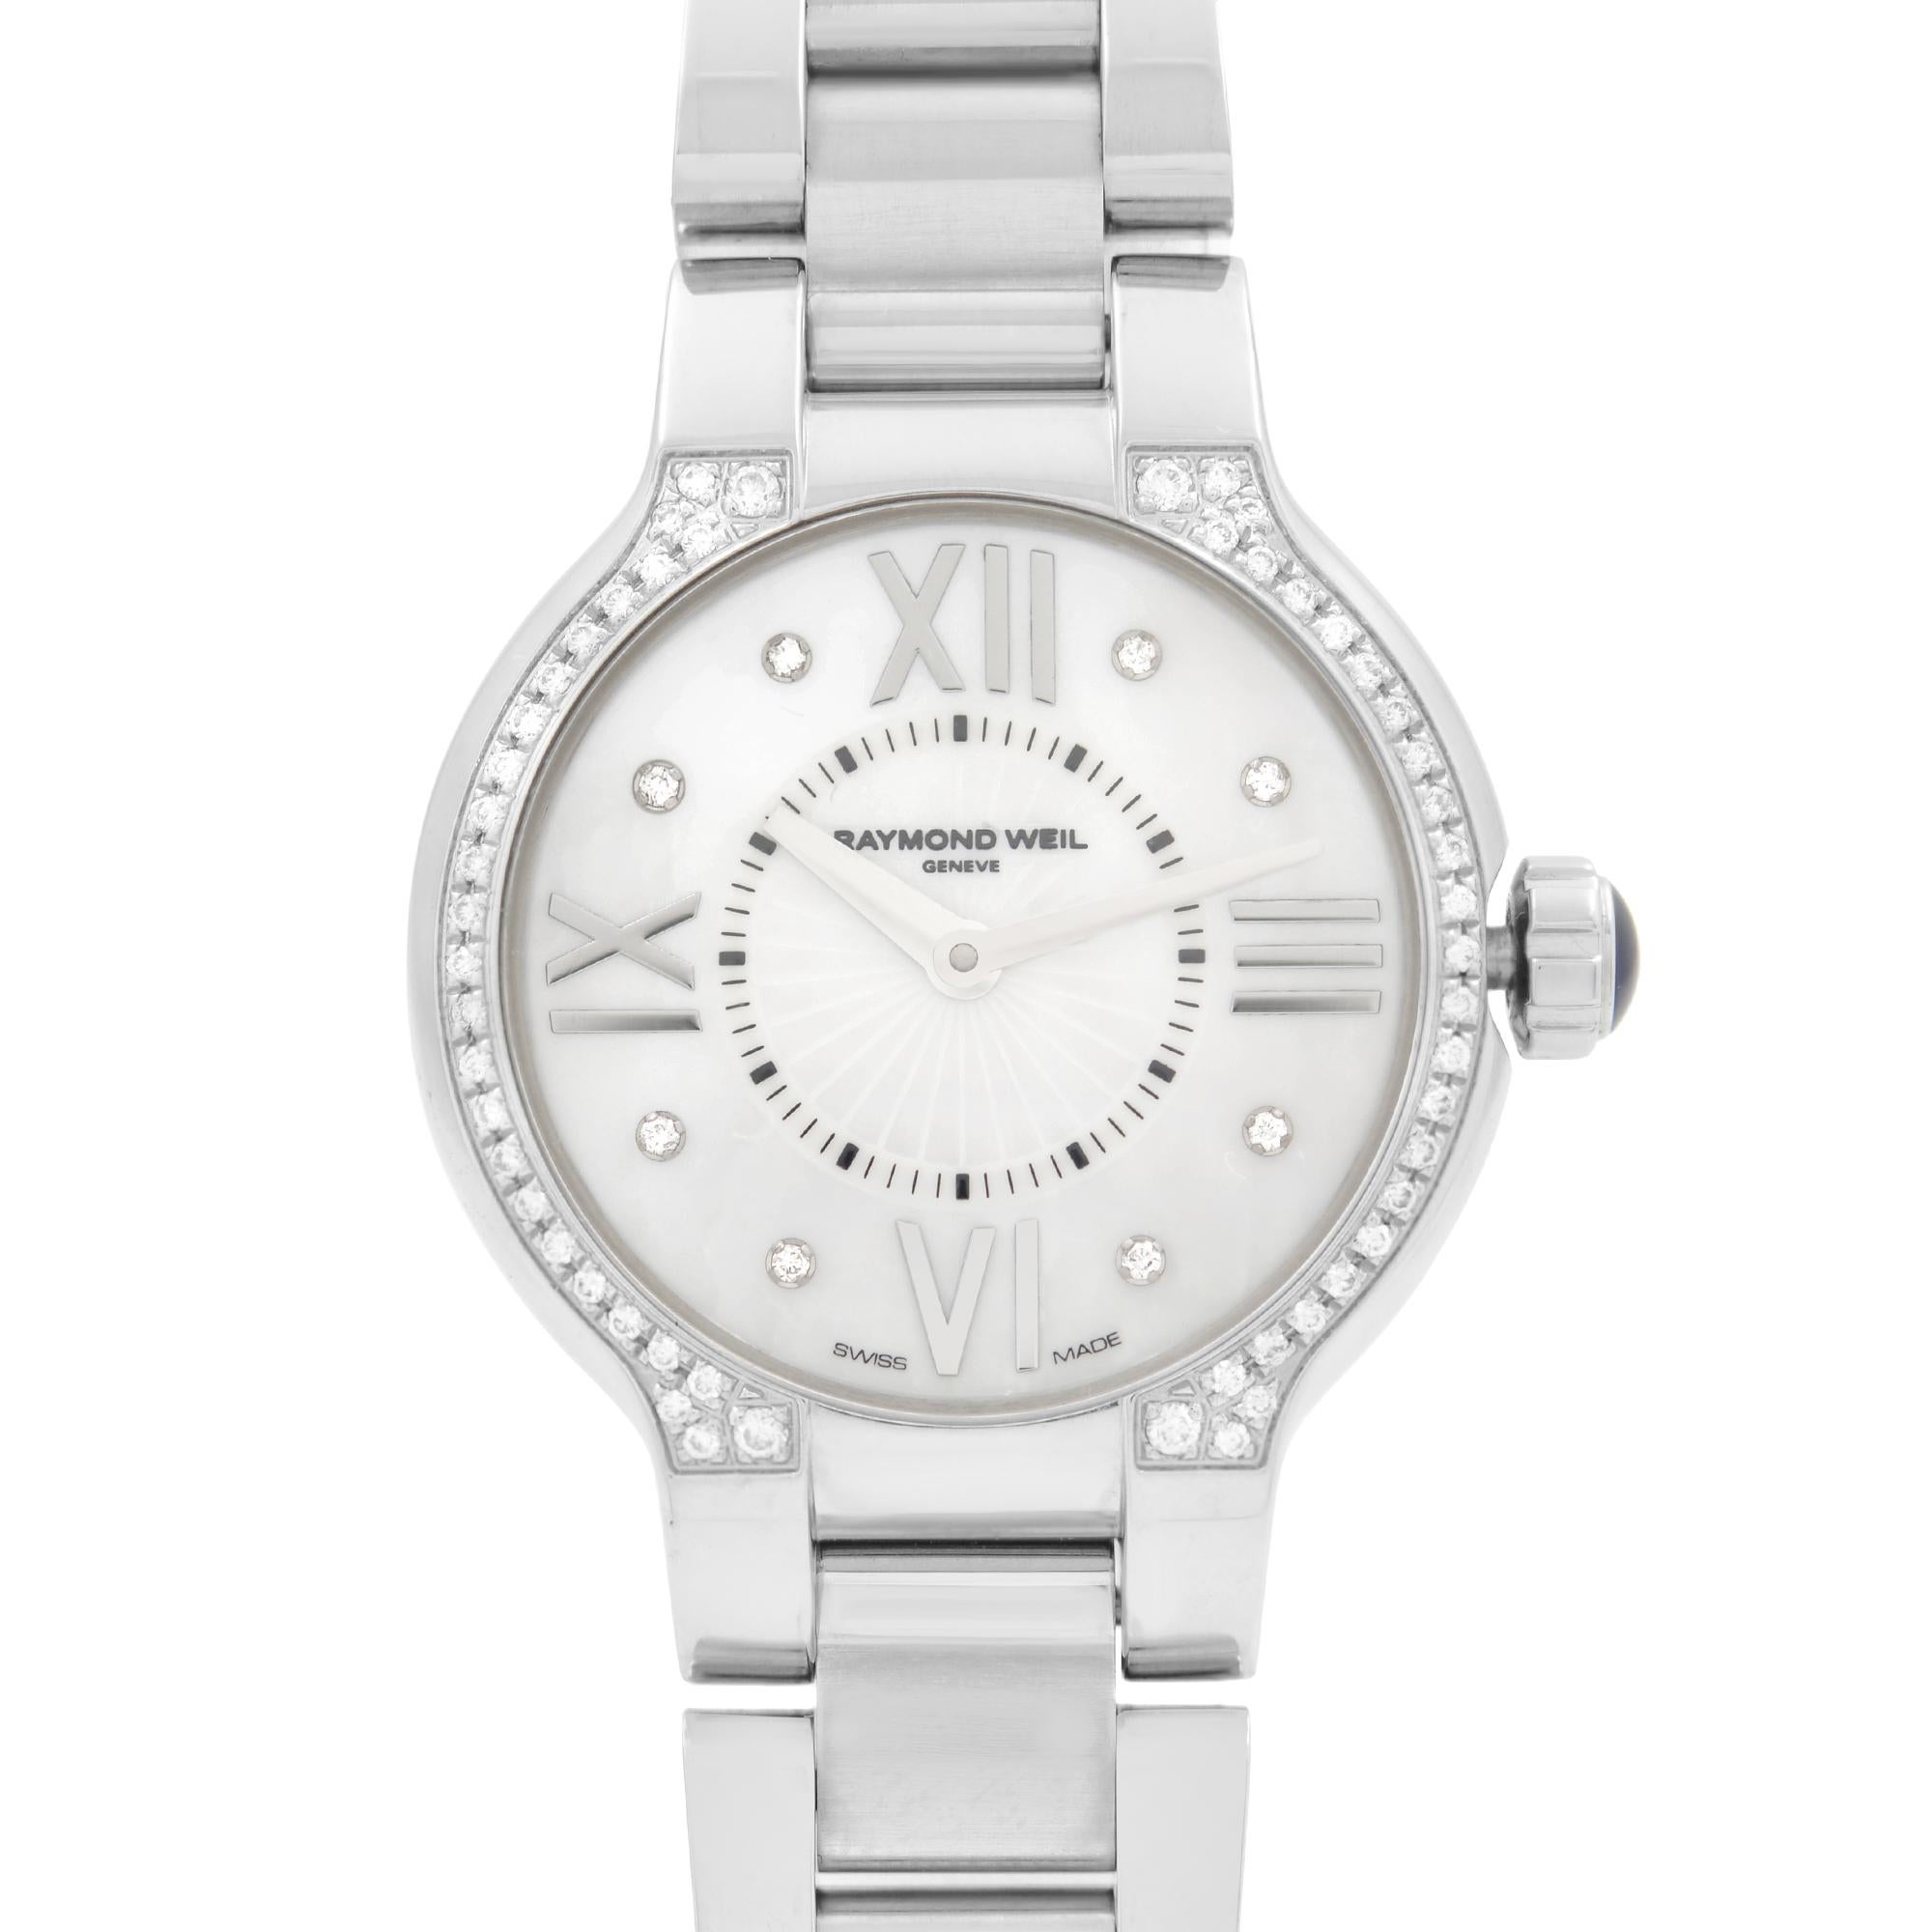 Store Display Model Raymond Weil Noemia Steel Diamond MOP Dial Quartz Ladies Watch 5927-STS-00995. This Beautiful Timepiece Features: Stainless Steel Case and Bracelet, Fixed Stainless Steel Bezel Set with 54 Diamonds, Mother-of-Pearl Dial with